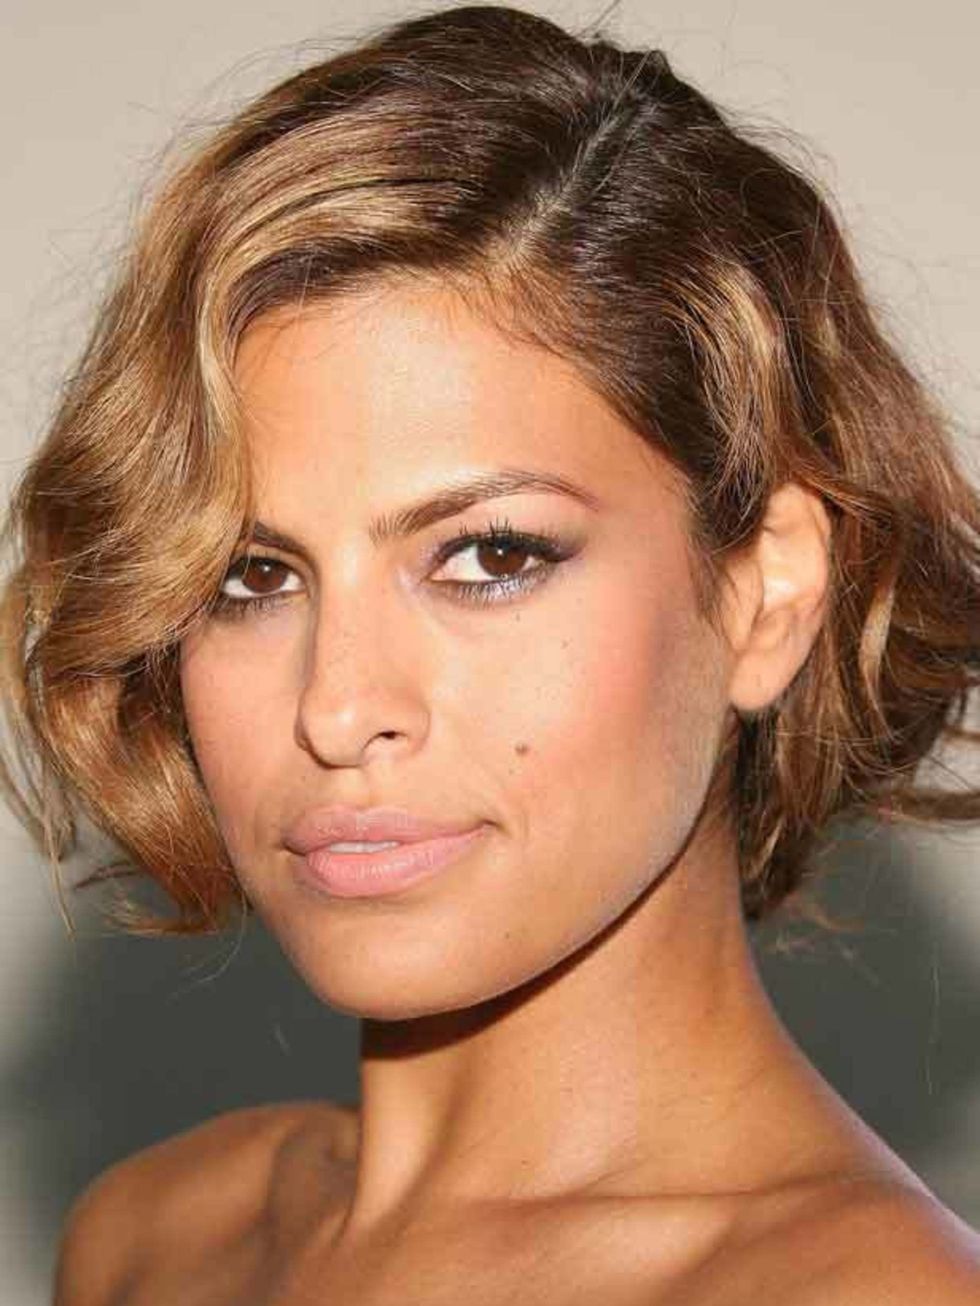 <p><a href="http://www.elleuk.com/beauty/celebrity-trends/everyone-s-doing-the-5-factor-diet">Click here to read Eva Mendes' diet secrets</a></p>